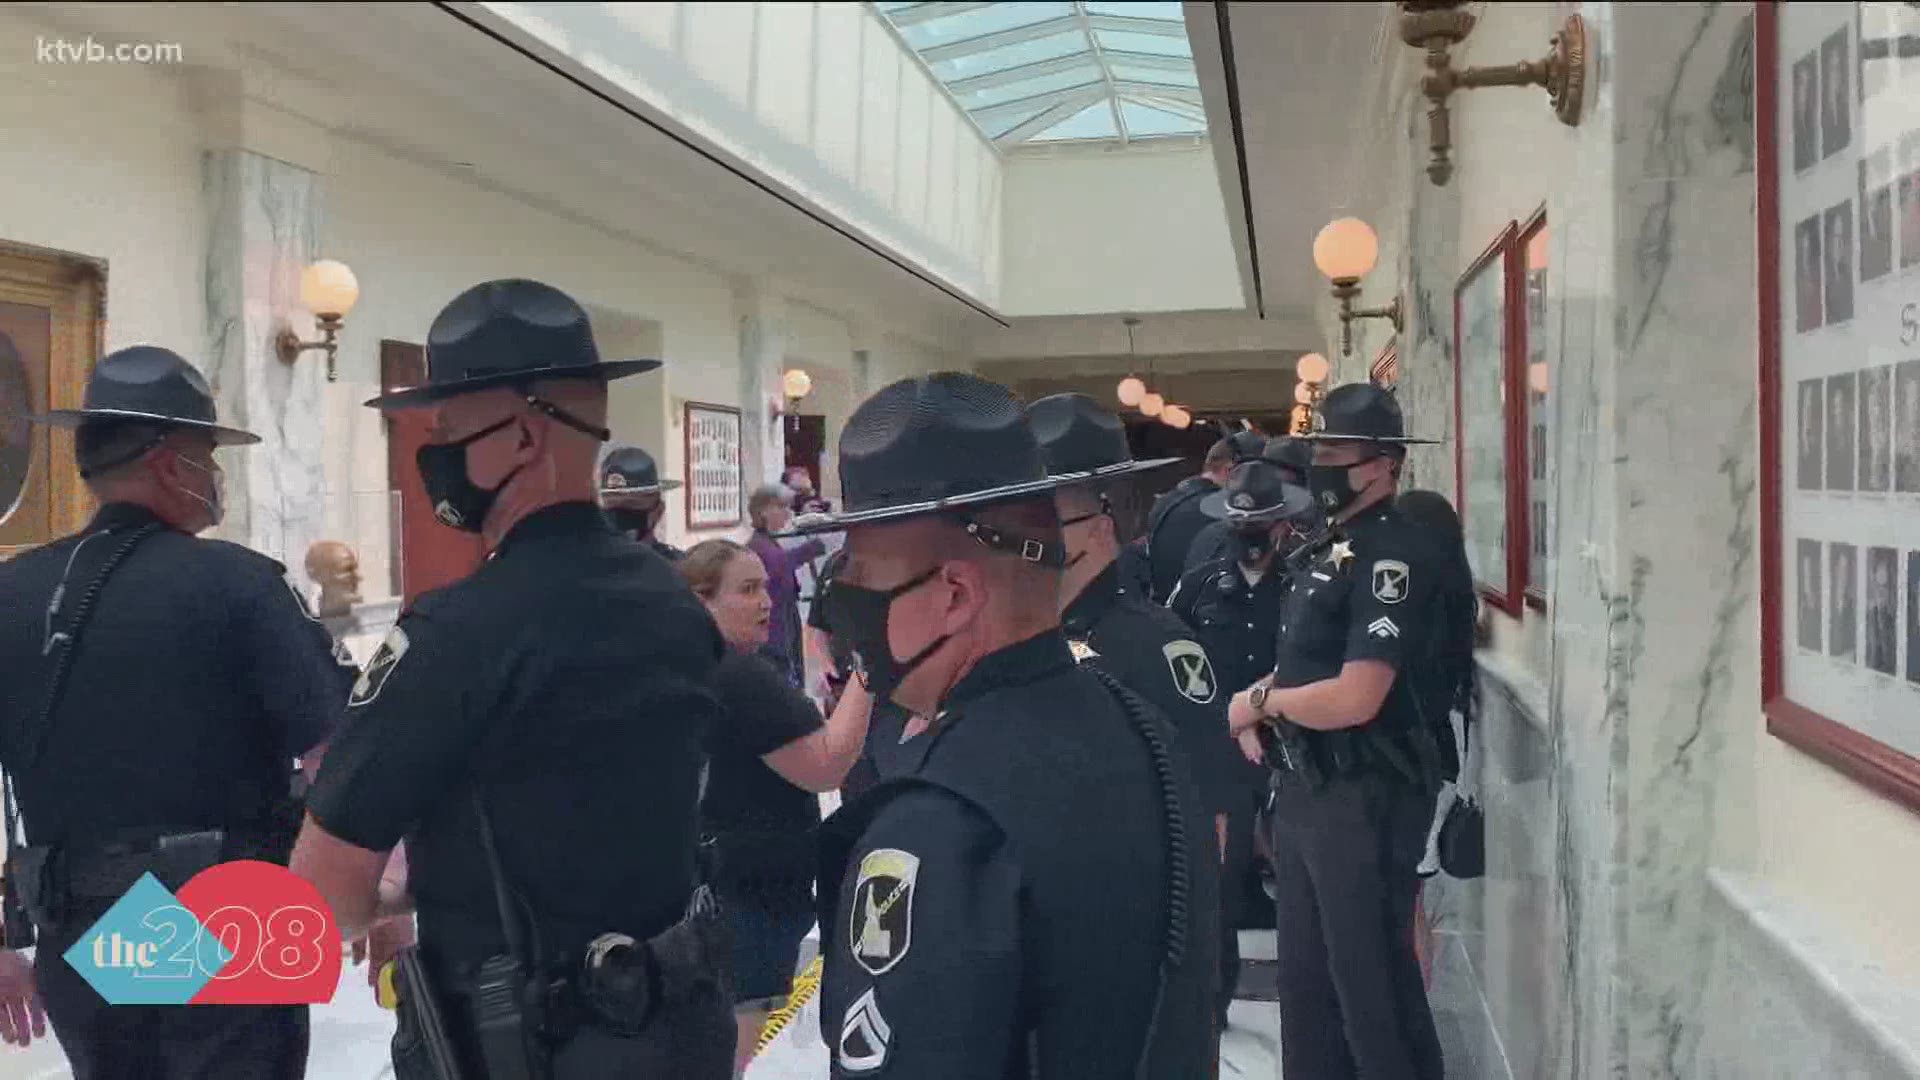 One change people may notice this legislative session is an increased presence of state troopers at the Capitol in an effort to make sure people feel safe.